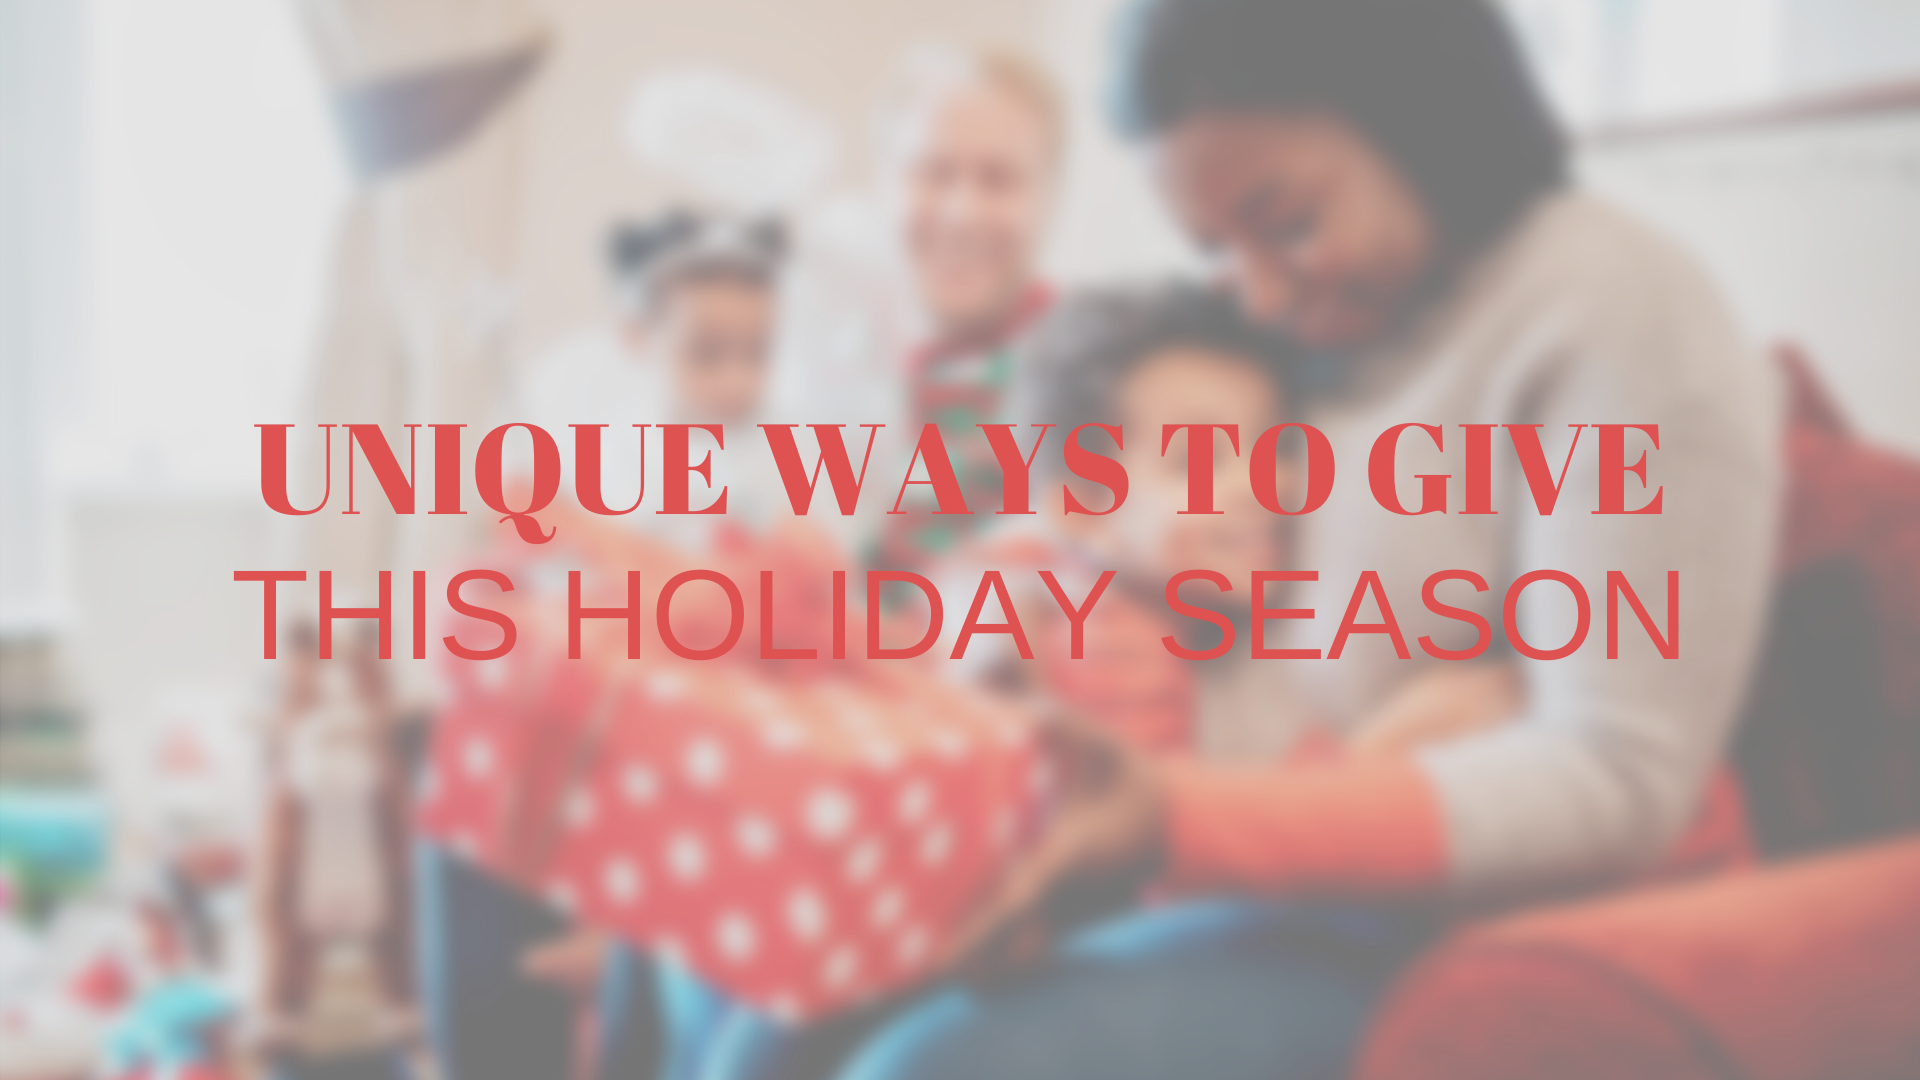 Unique Ways to Give this Holiday Season